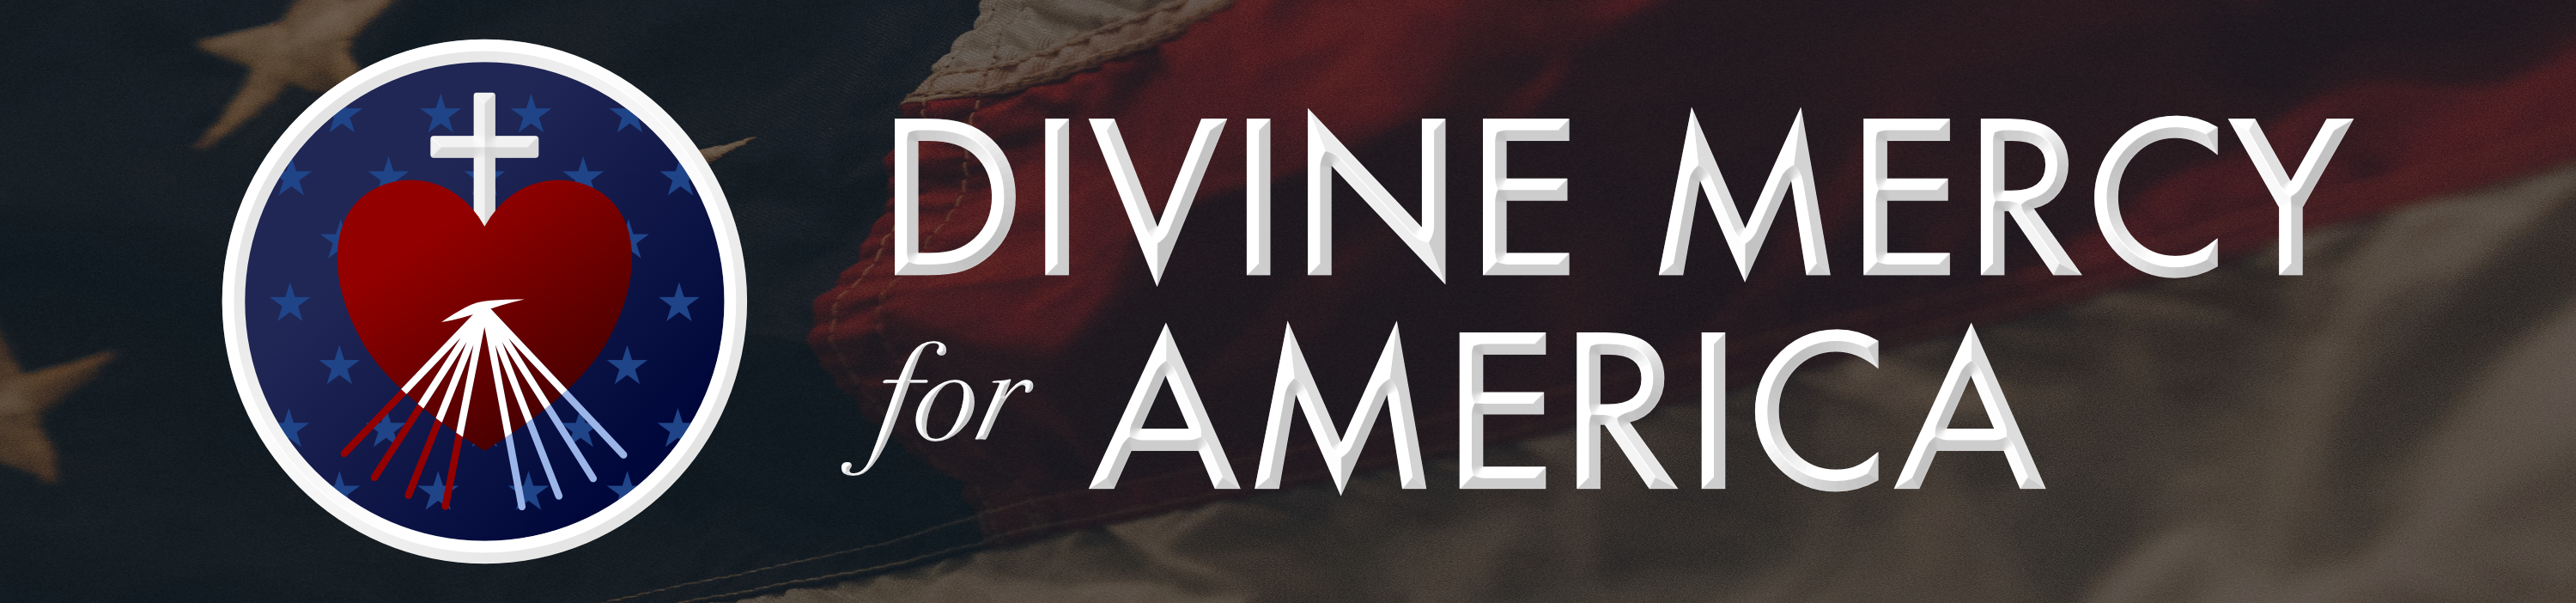 Divine Mercy for America Monthly Newsletter